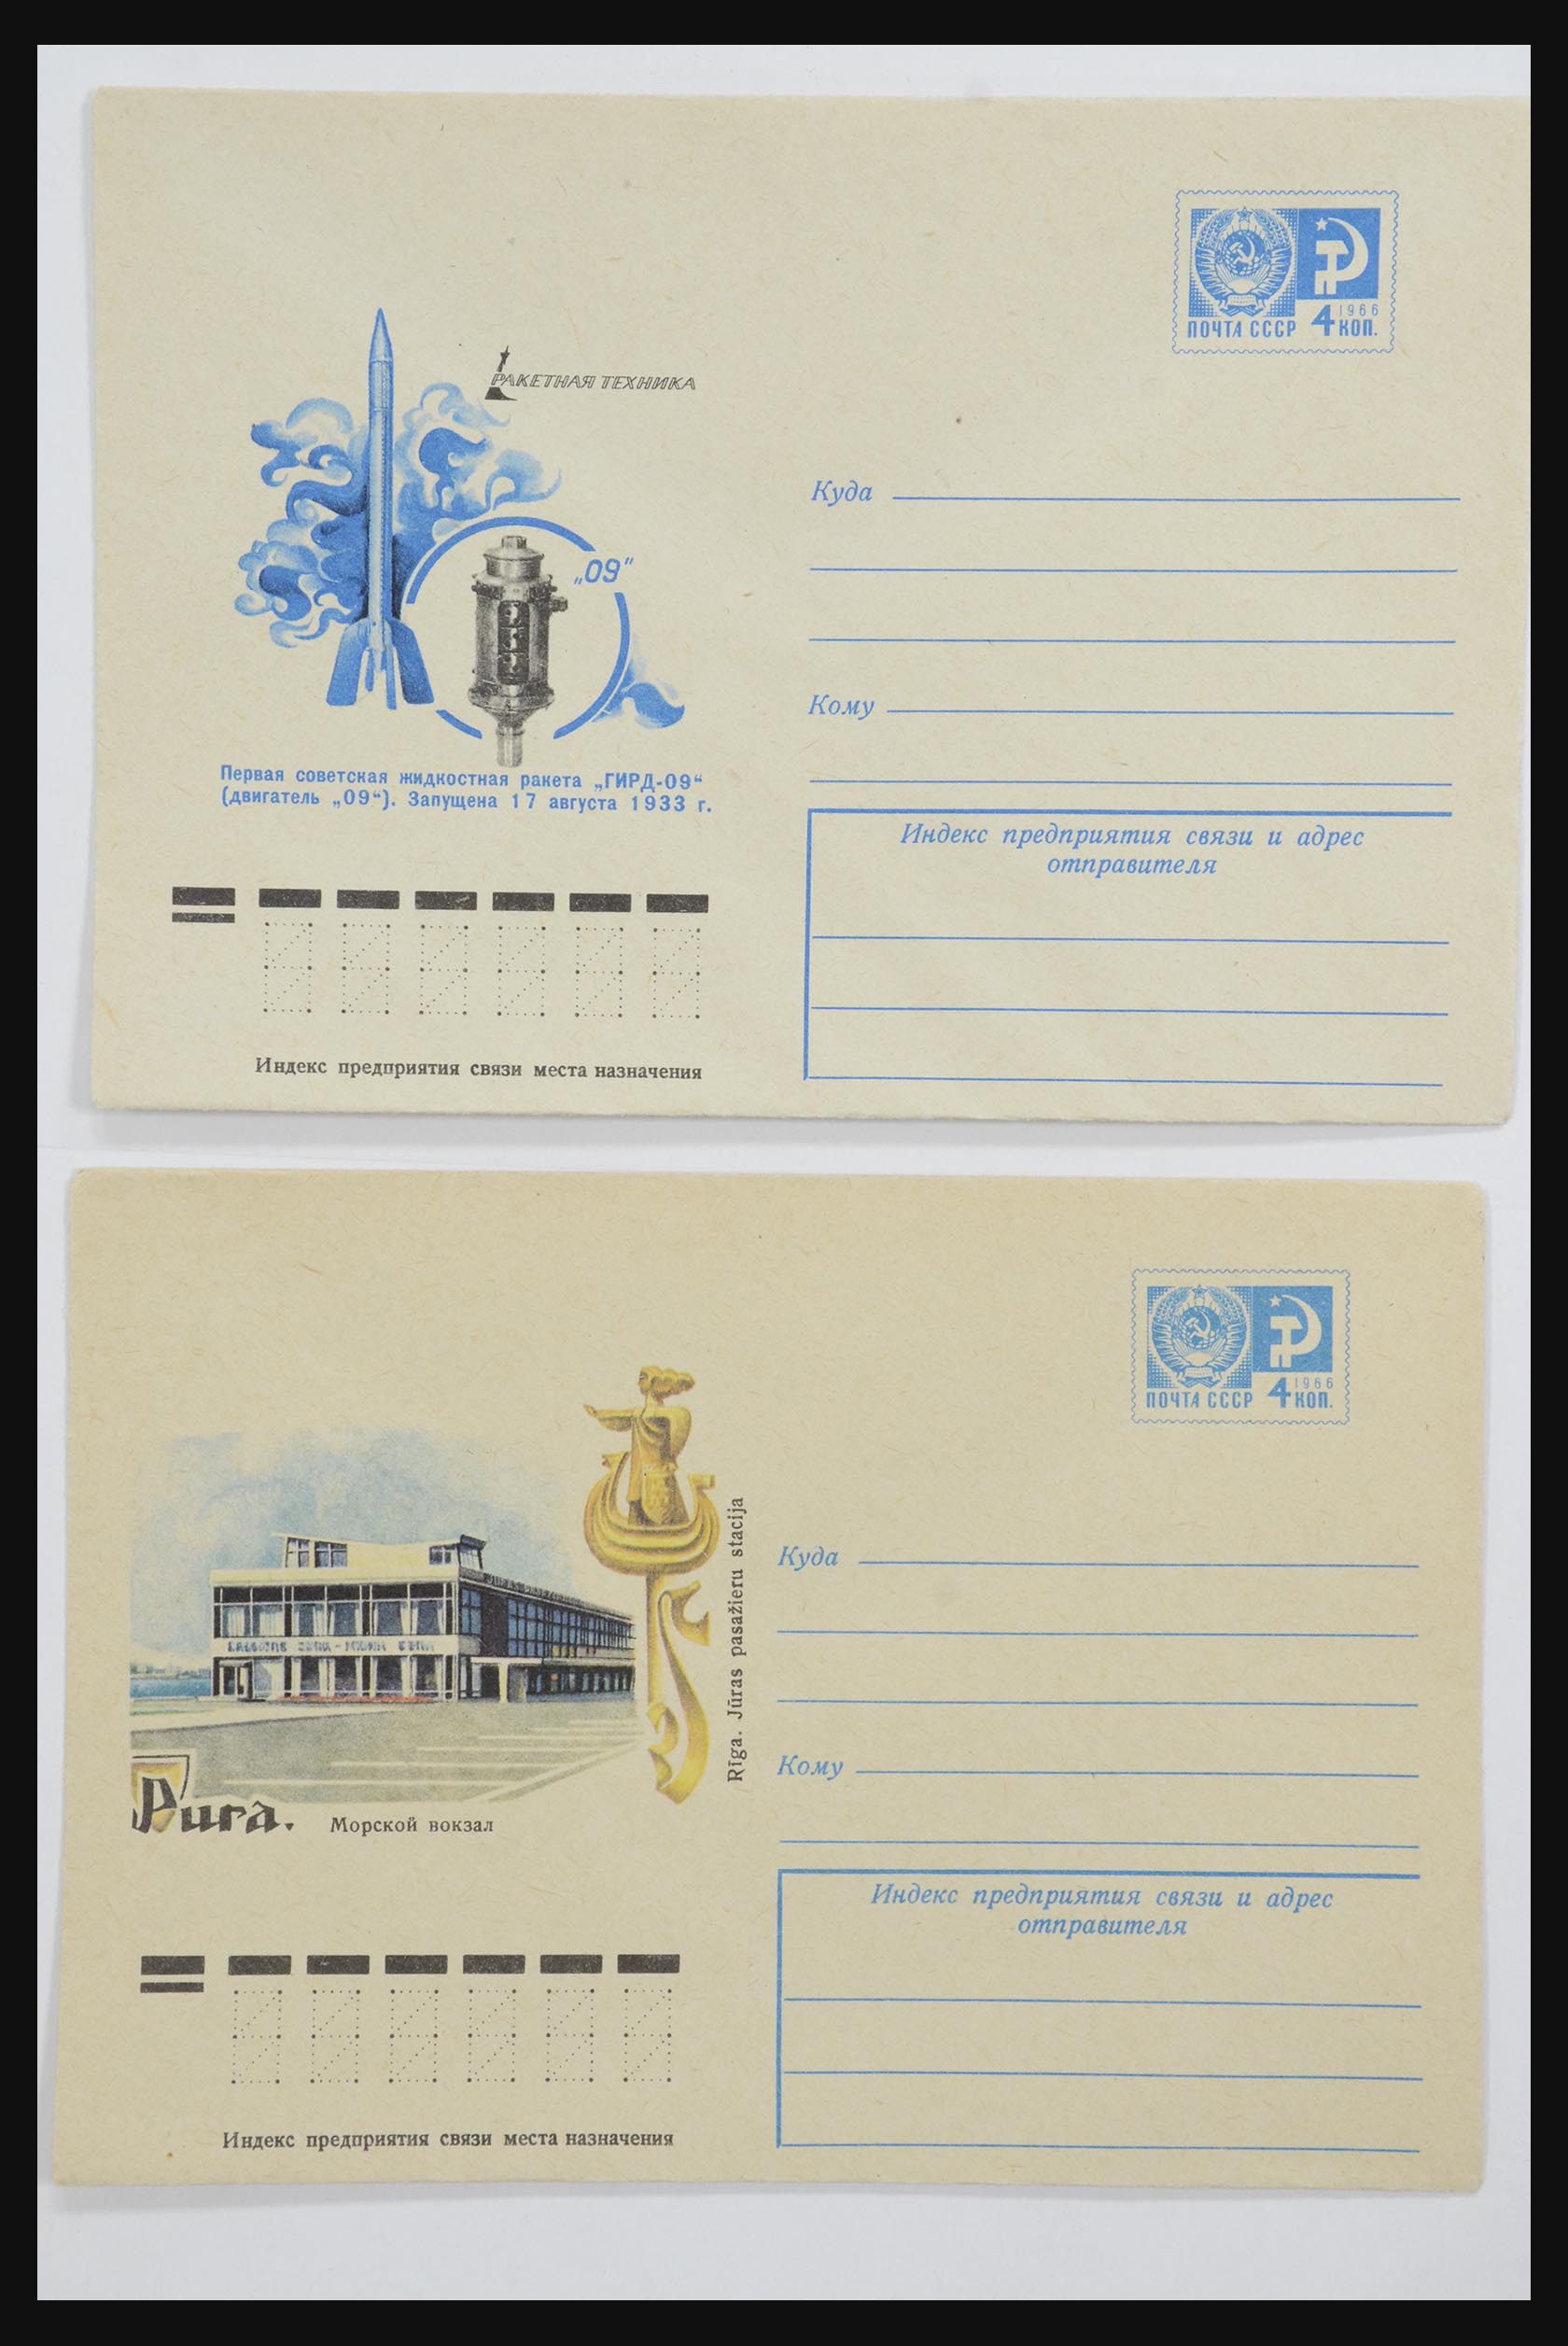 31928 0064 - 31928 Eastern Europe covers 1960's-1990's.